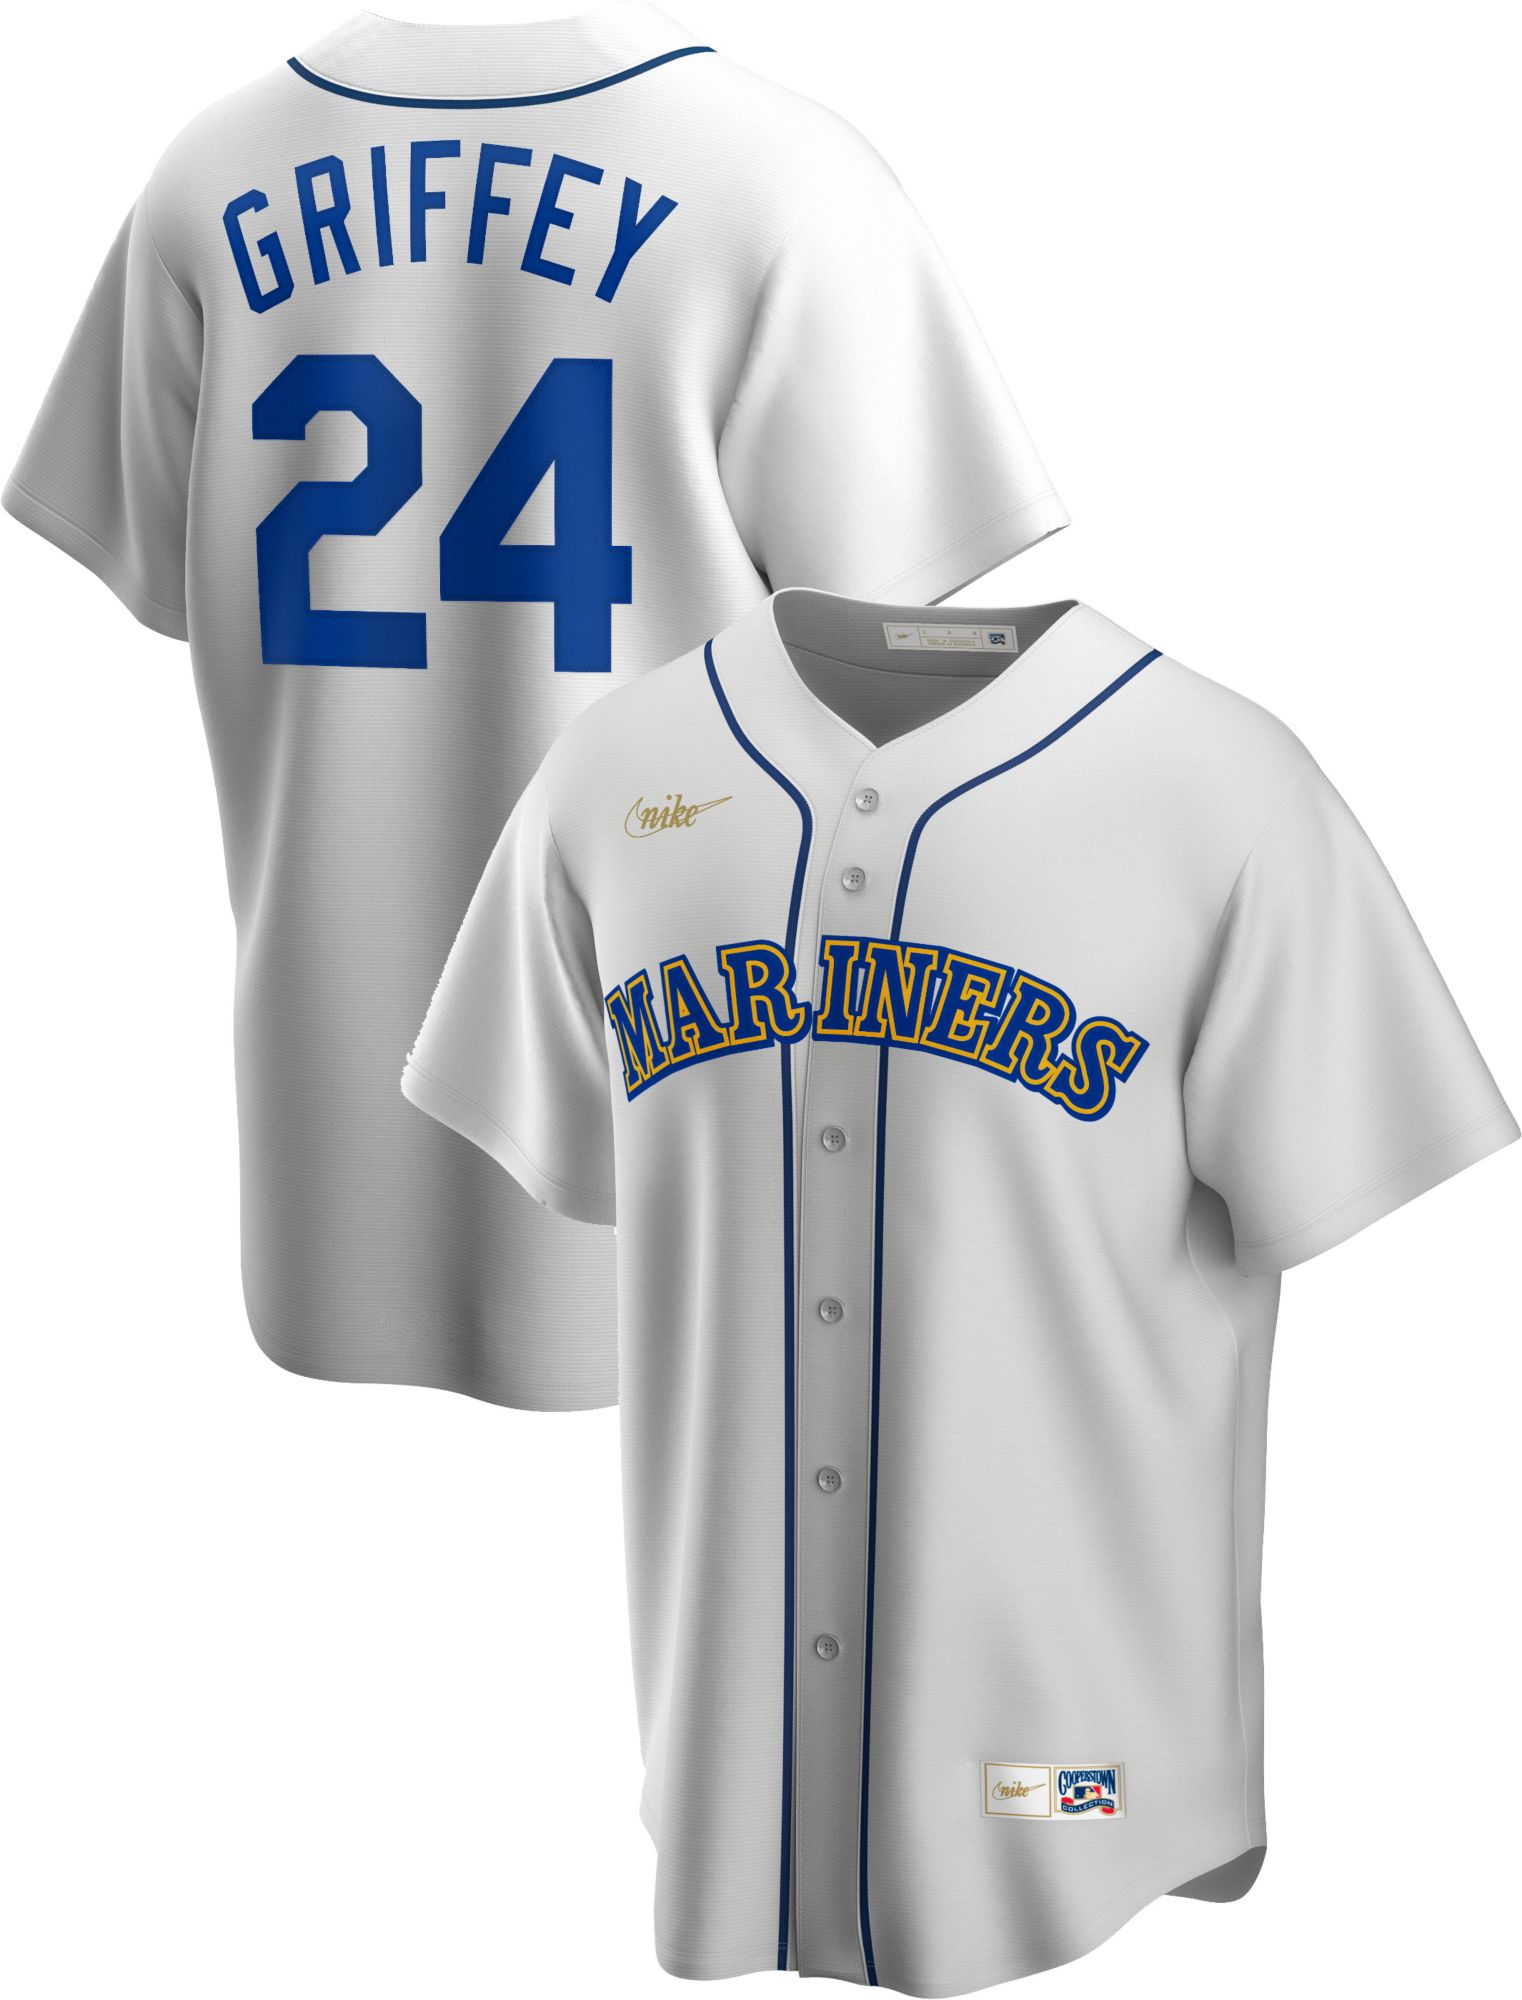 Seattle Mariners Royal 2020 Alternate Authentic Mallex Smith Men’s Jersey